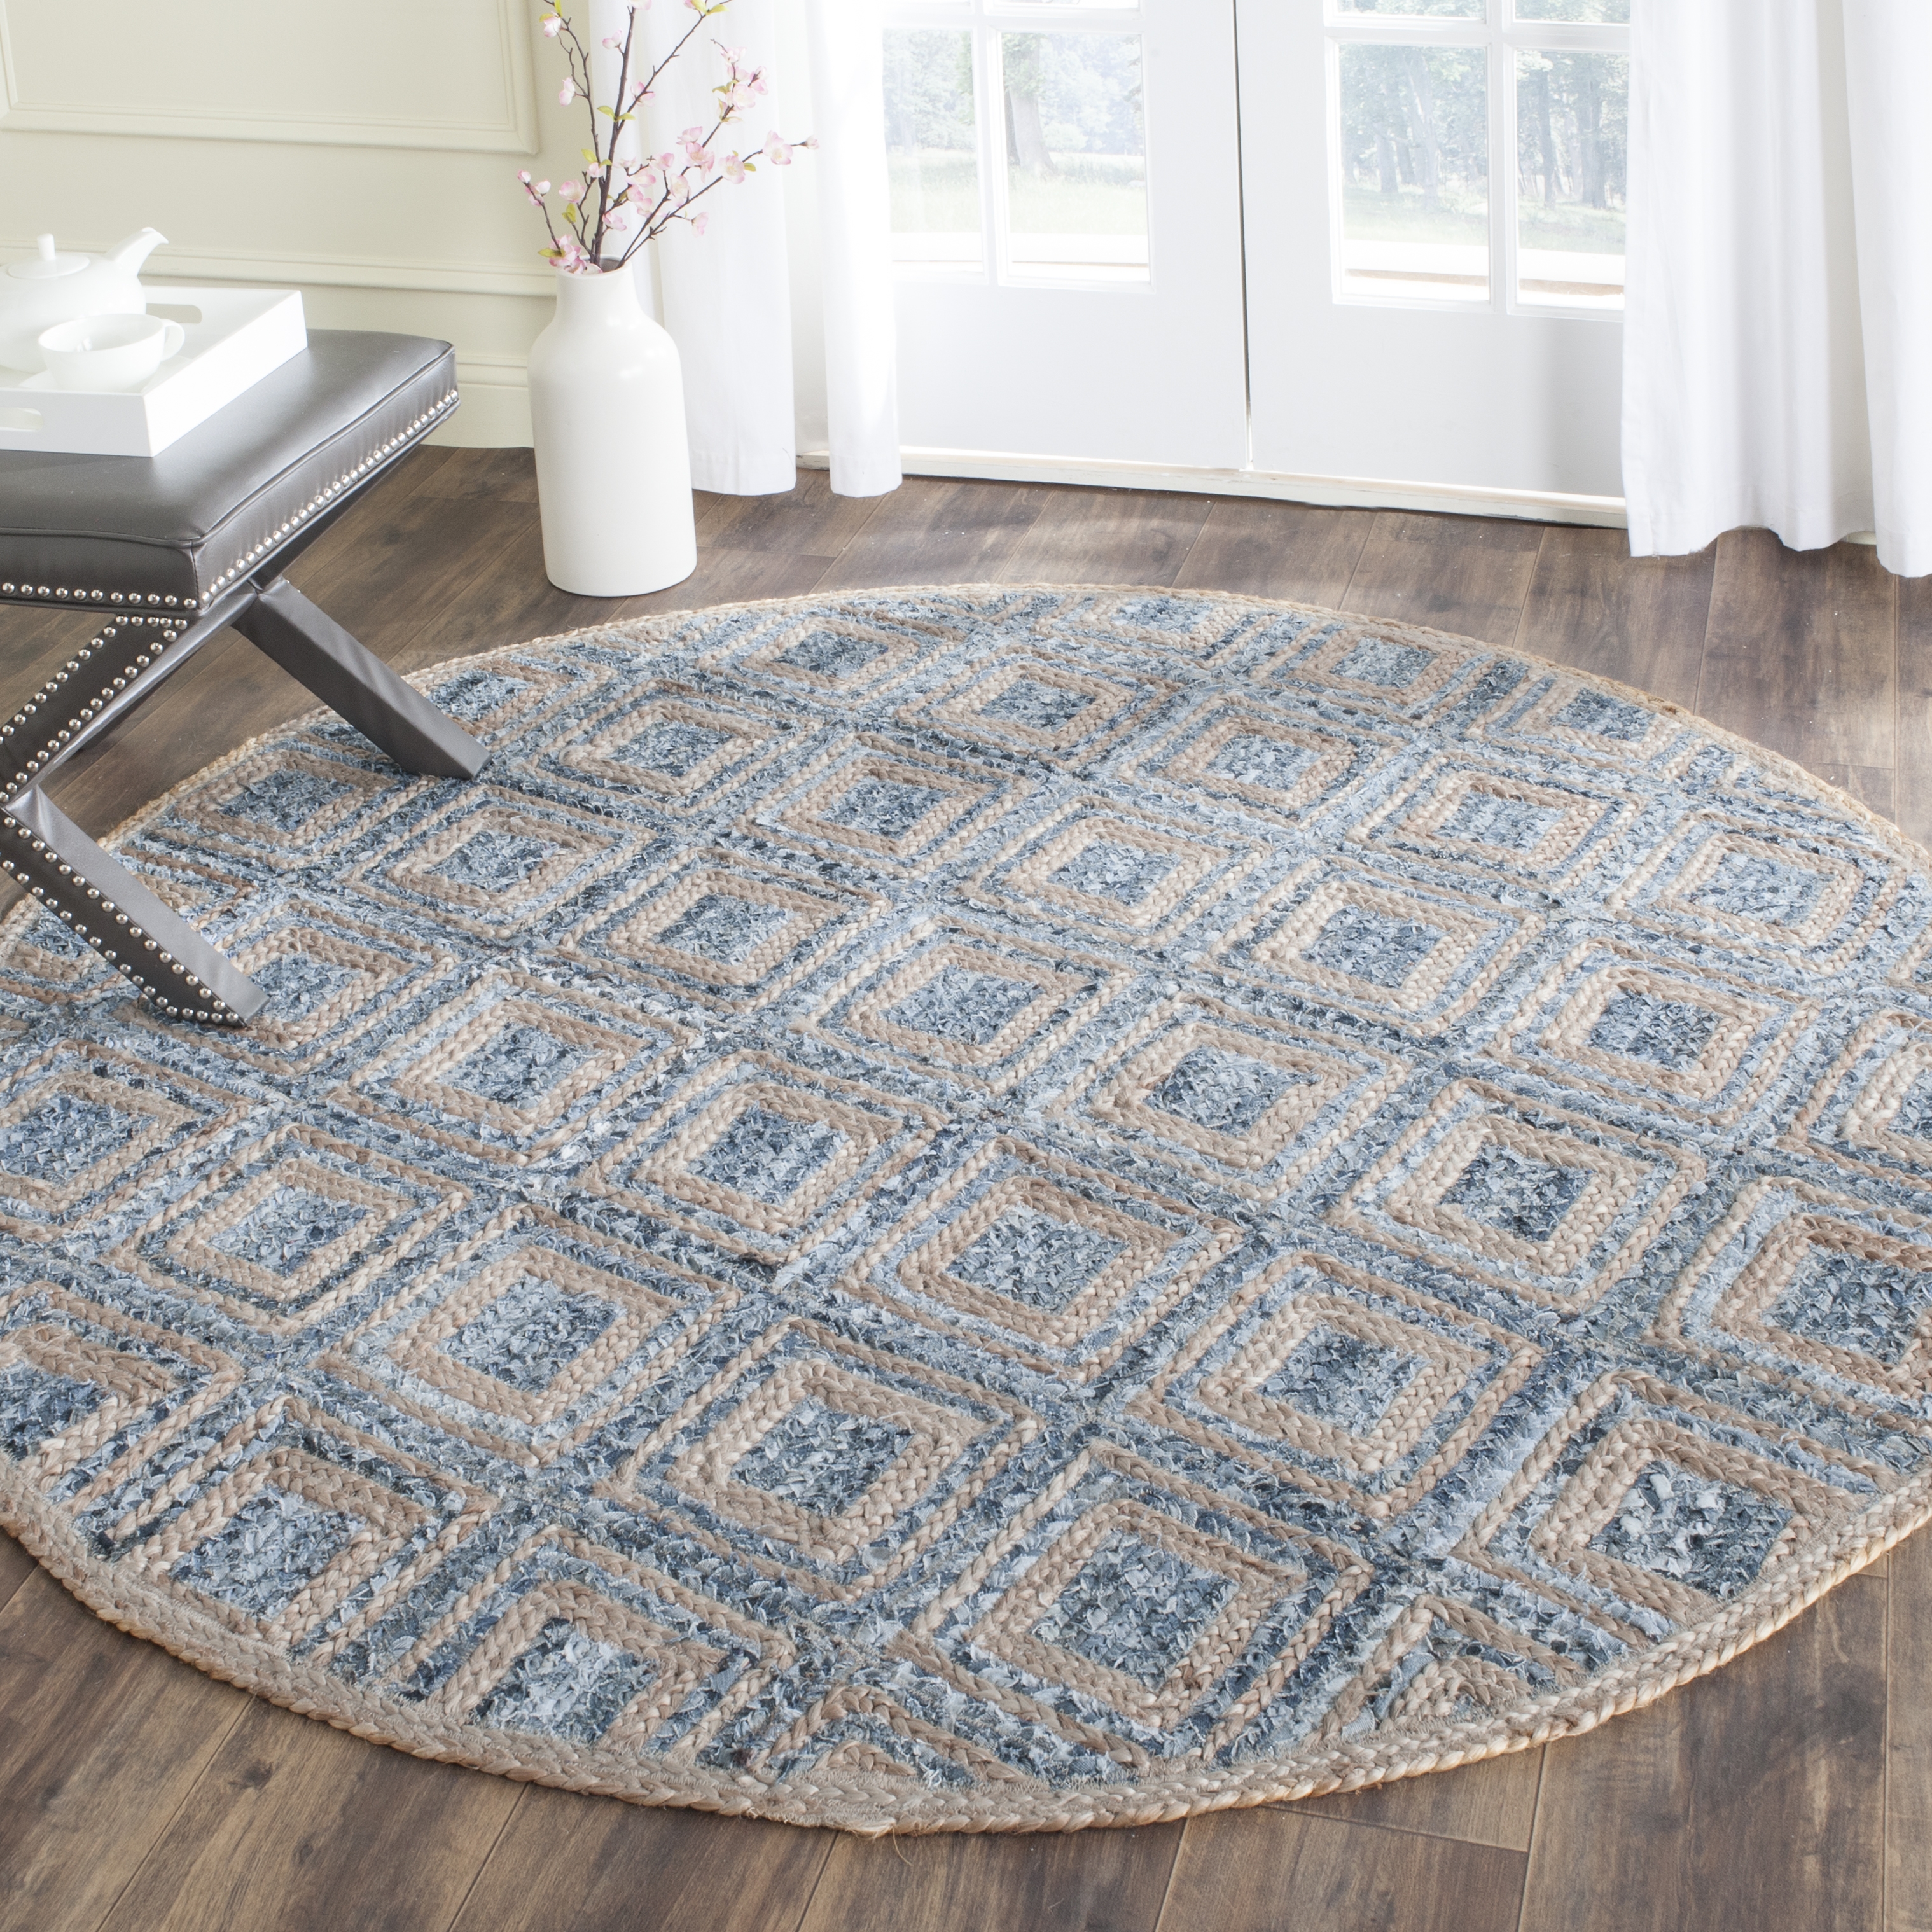 Arlo Home Hand Woven Area Rug, CAP354A, Natural/Blue,  6' X 6' Round - Image 1